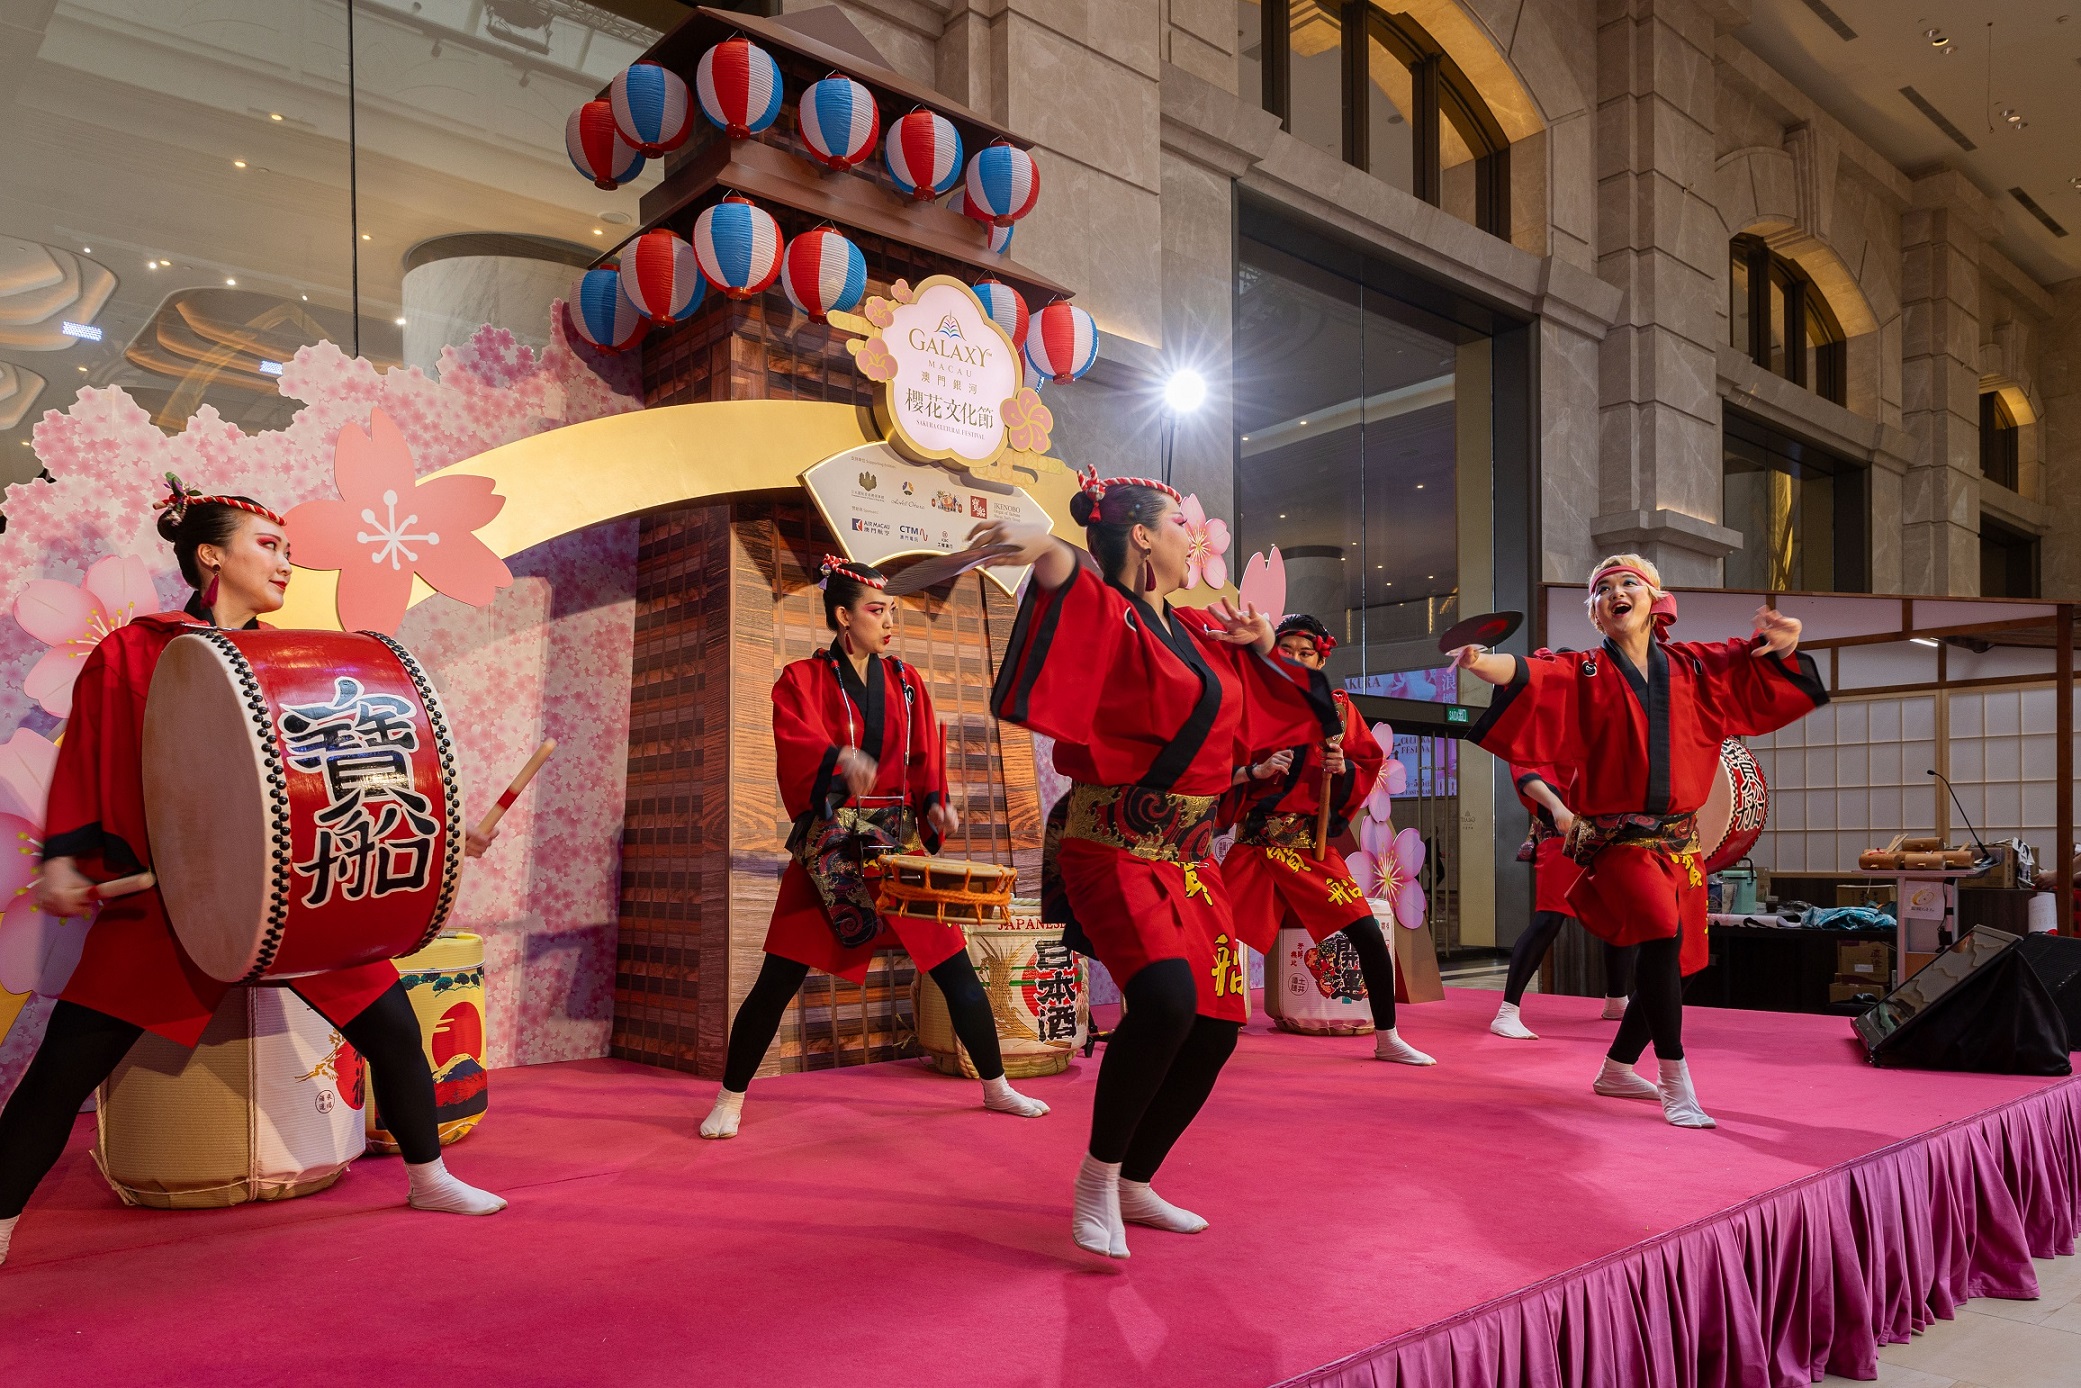 A performance crew specially invited from Japan will delight guests at the Sakura Cultural Festival with captivating traditional Japanese taiko drum performances.